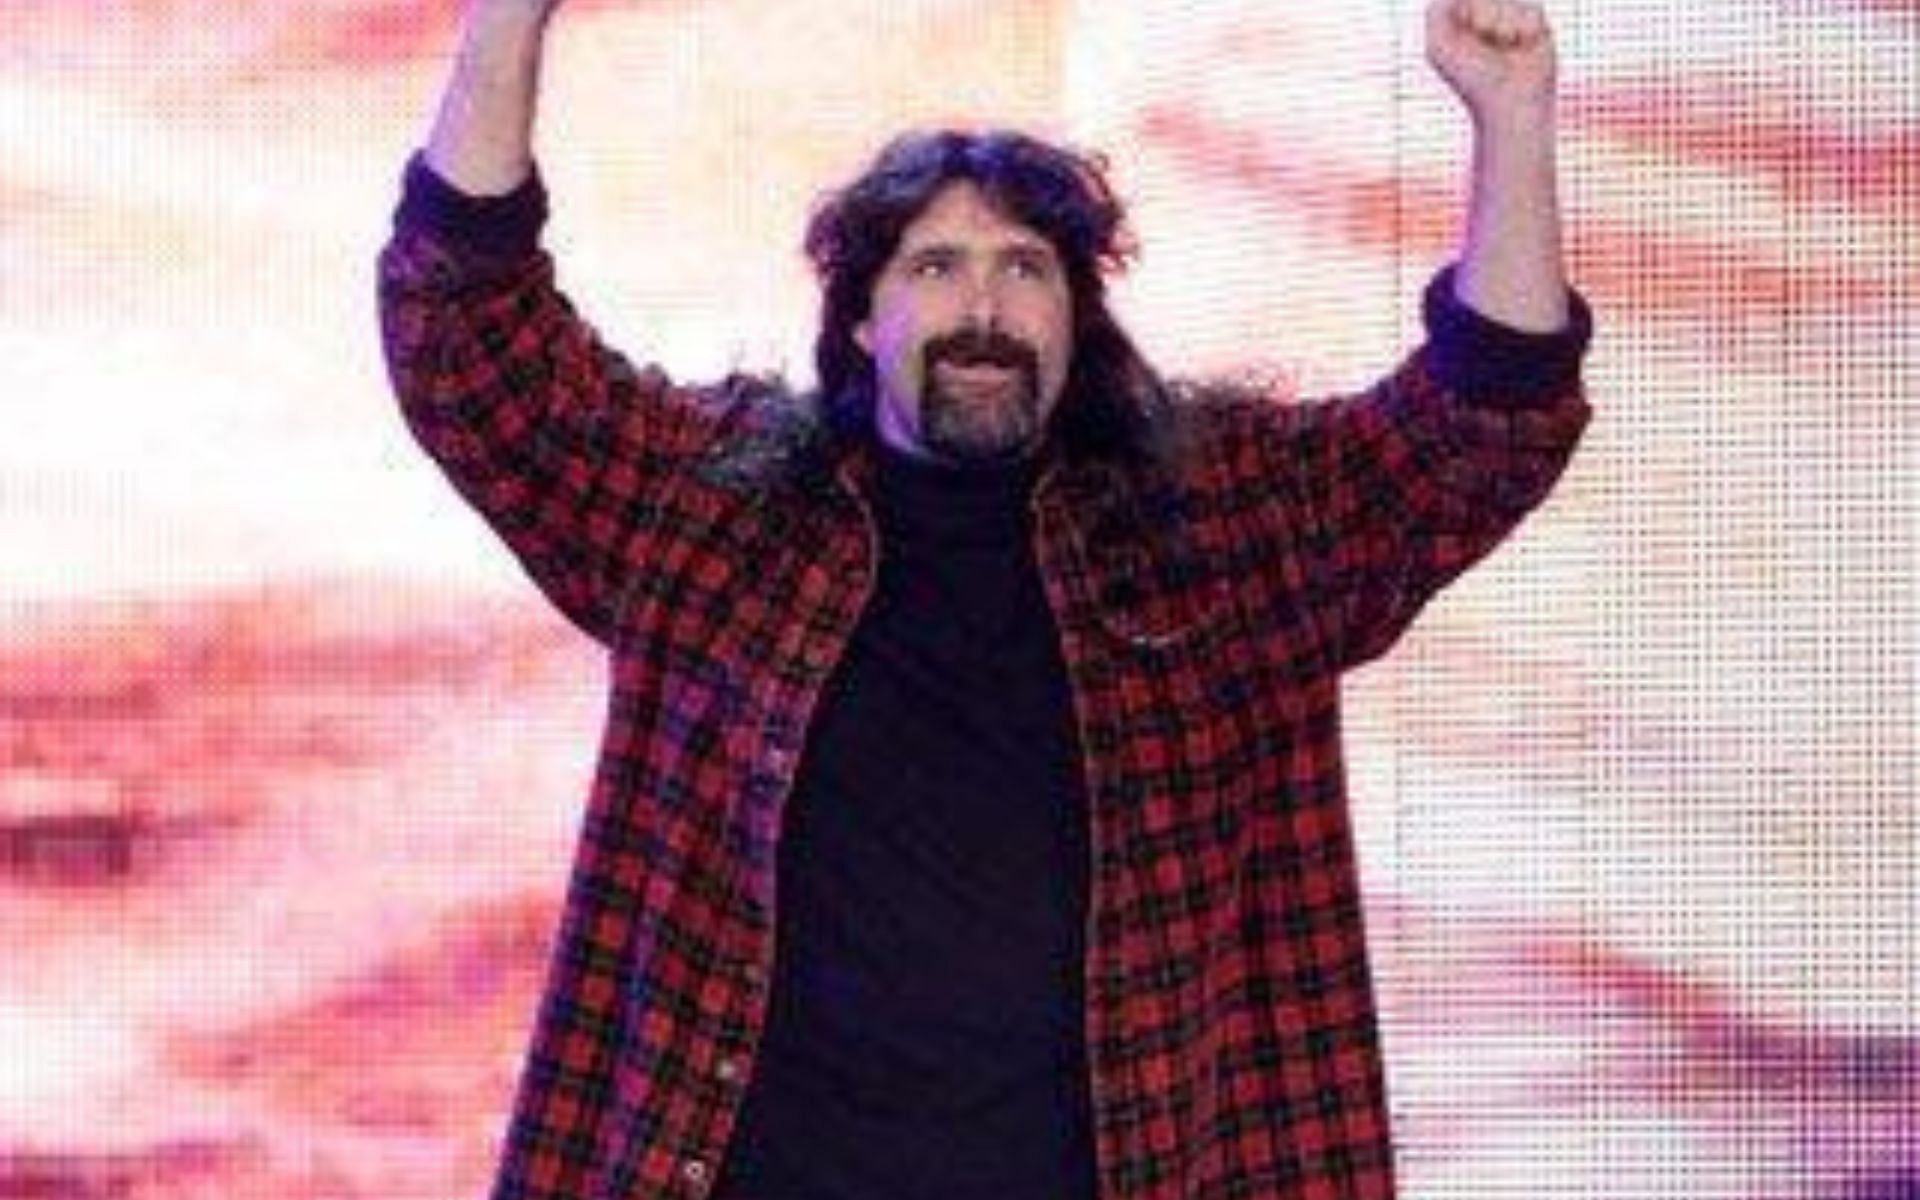 Mick Foley is known for his hardcore style of wrestling